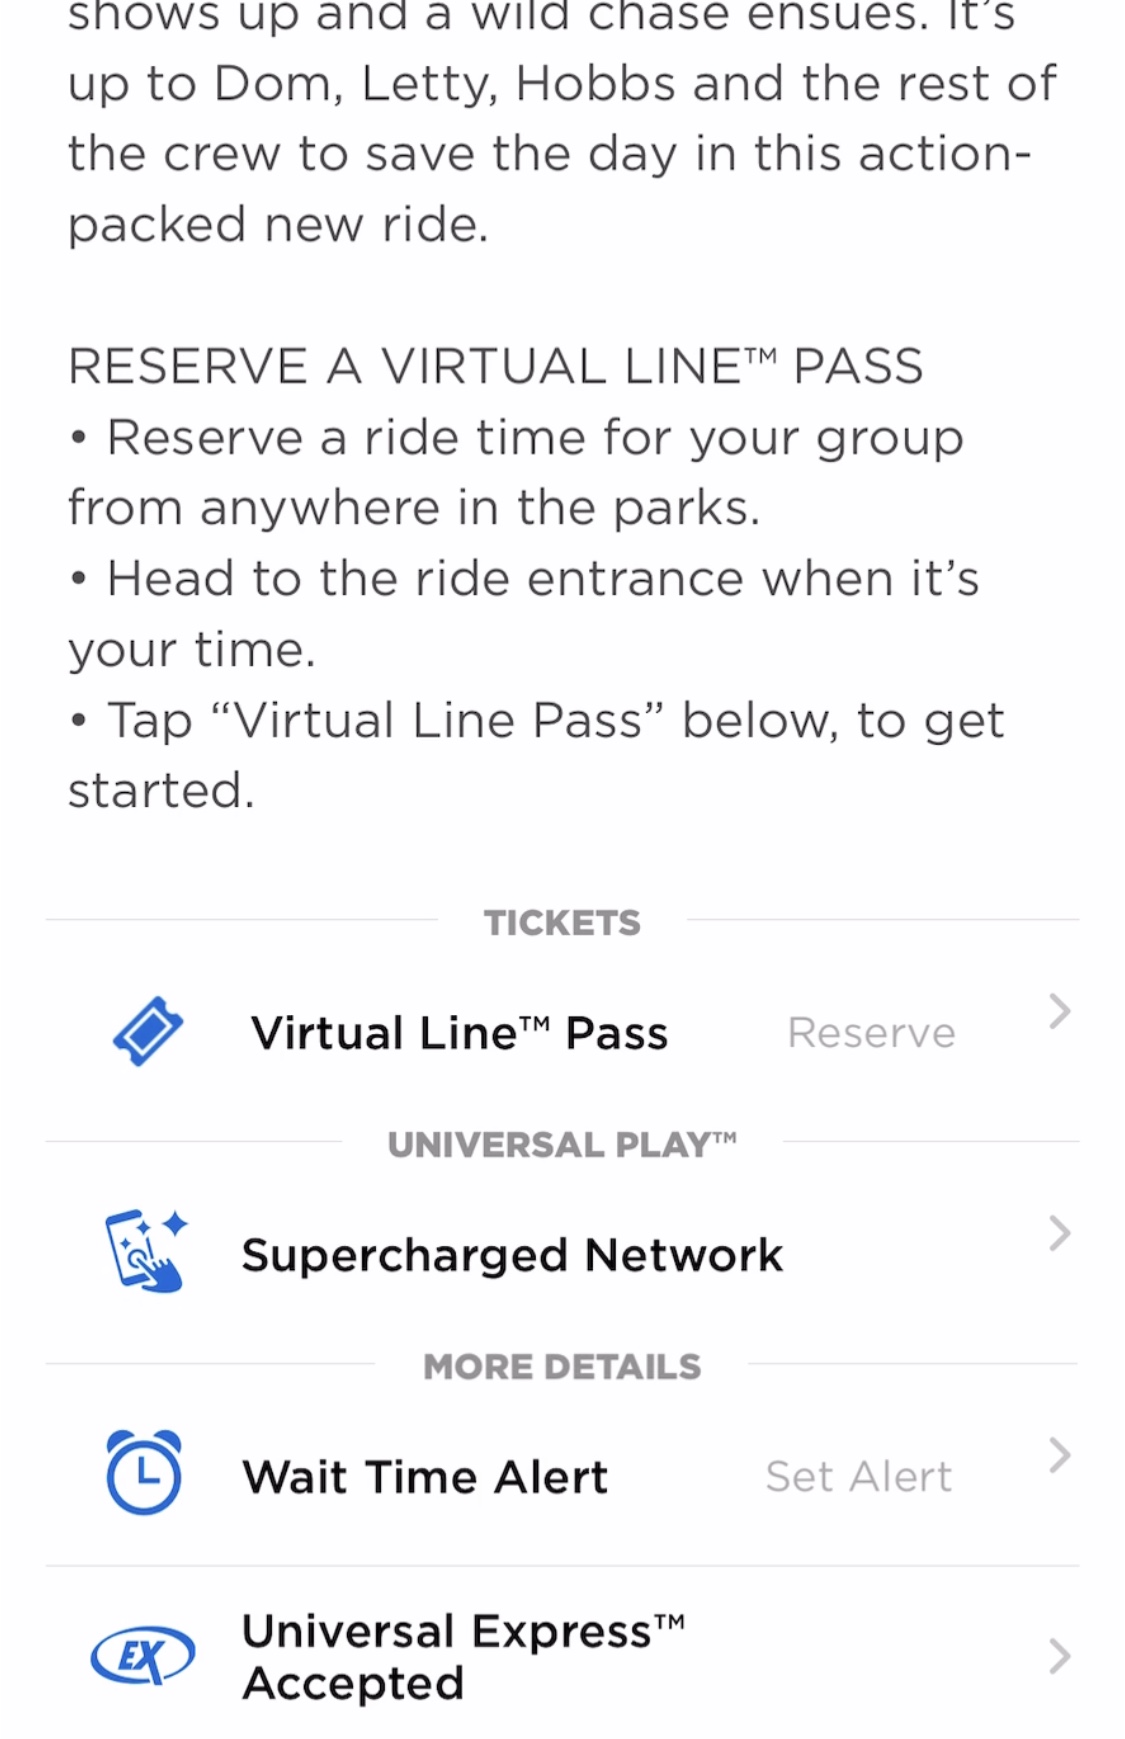 How to Use Universal Orlando's Virtual Line Magic Lamp Vacations